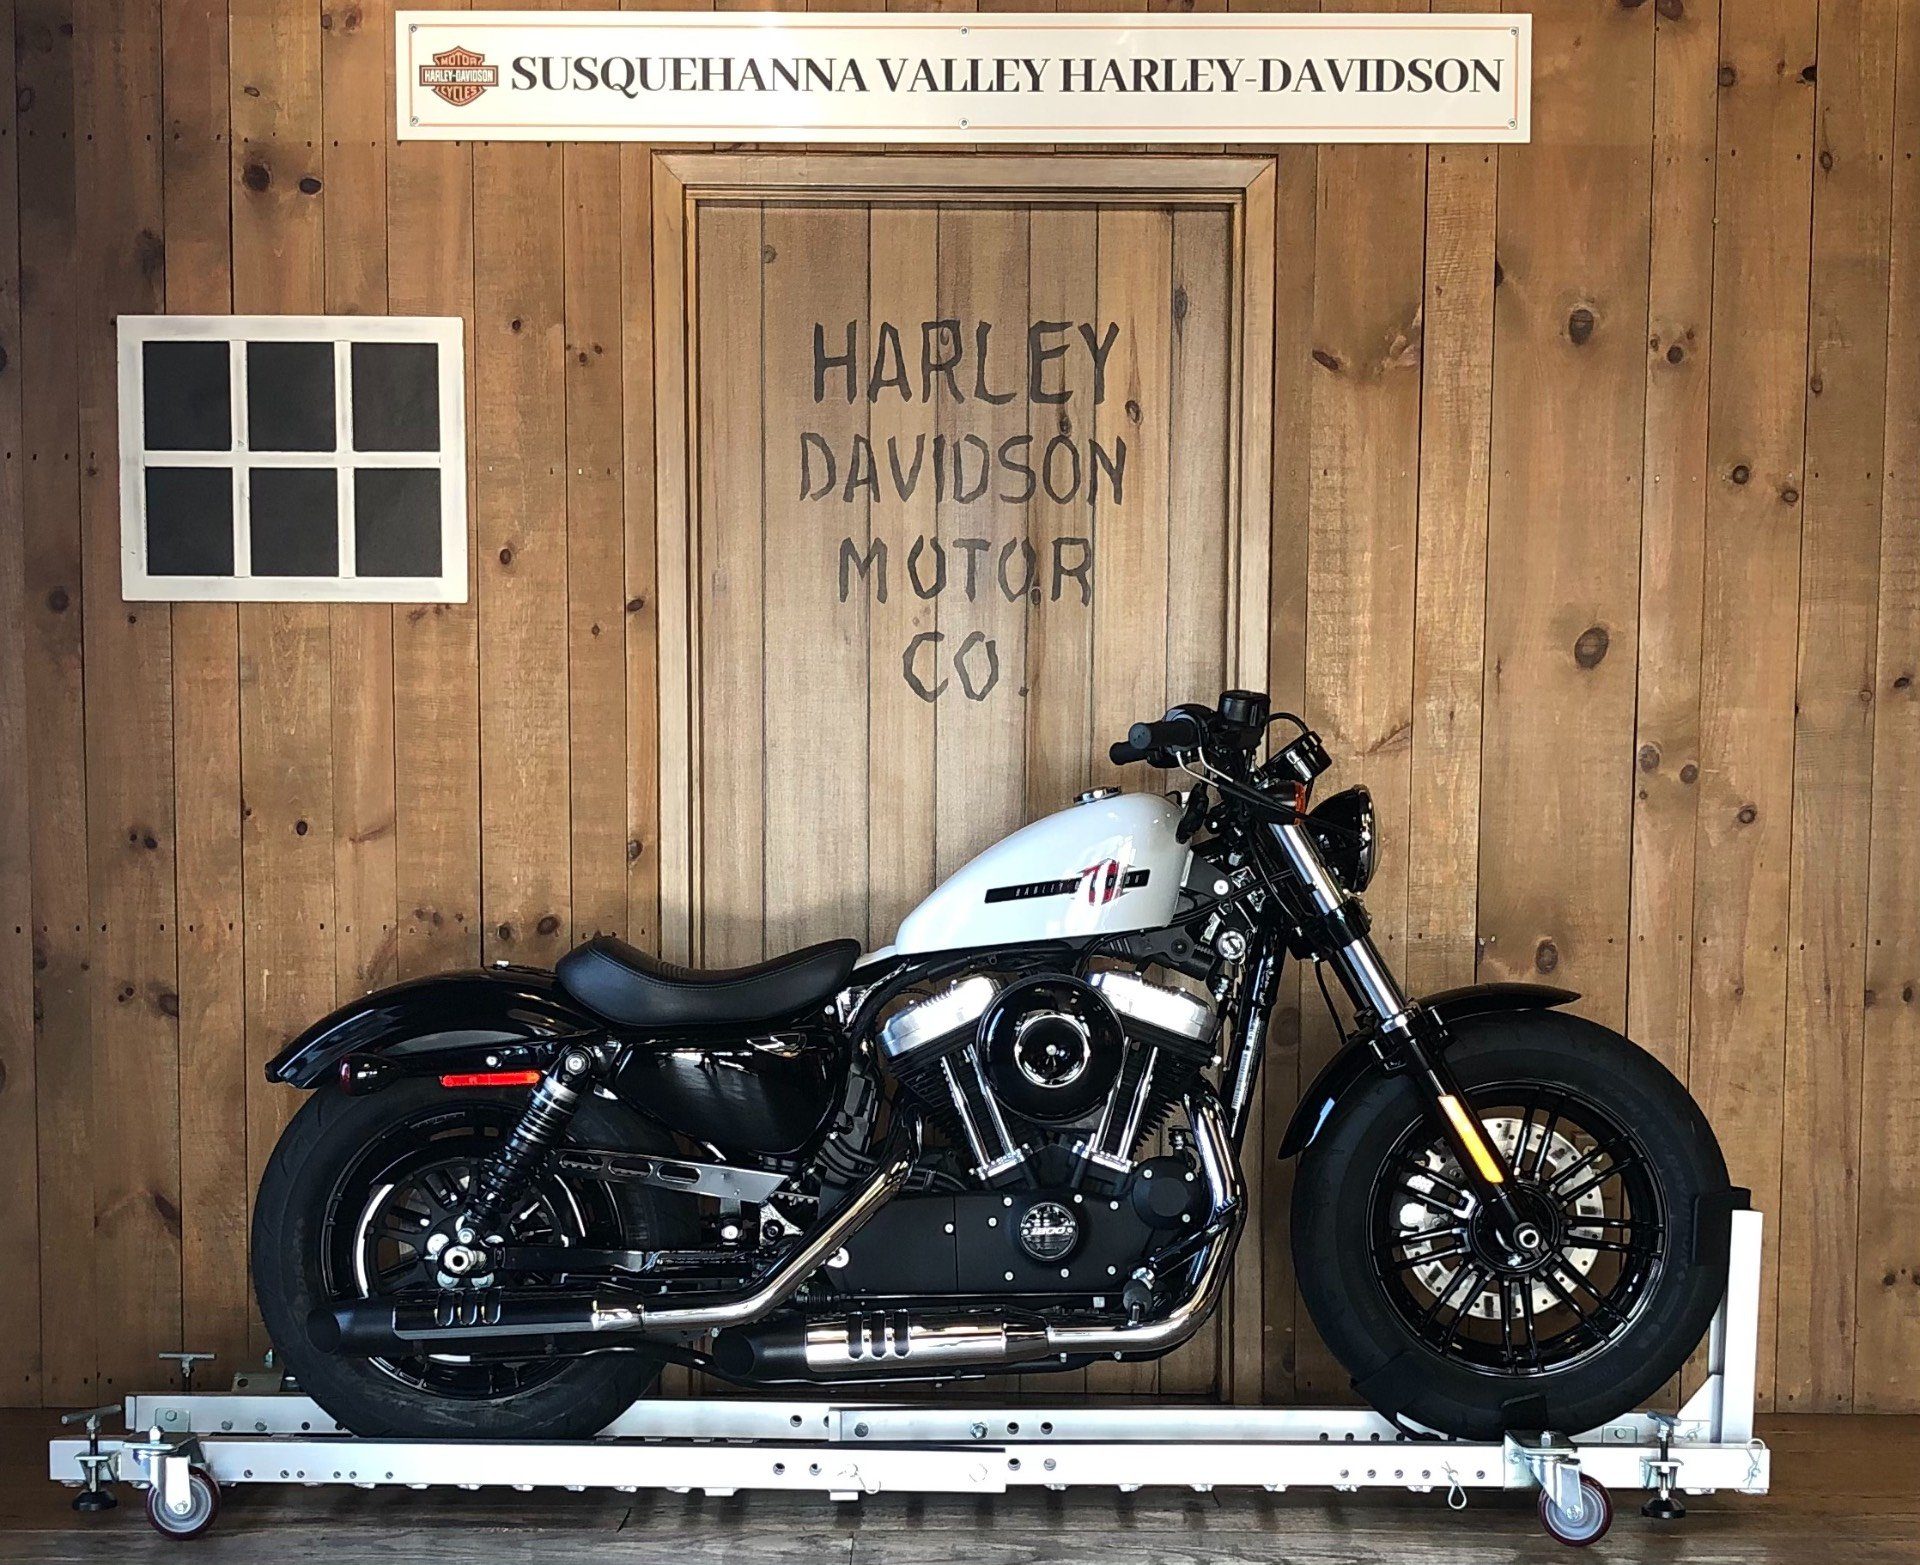 Used 2020 Harley Davidson Sportster 48 Motorcycles In Harrisburg Pa Sp430040 Stone Washed White Pearl